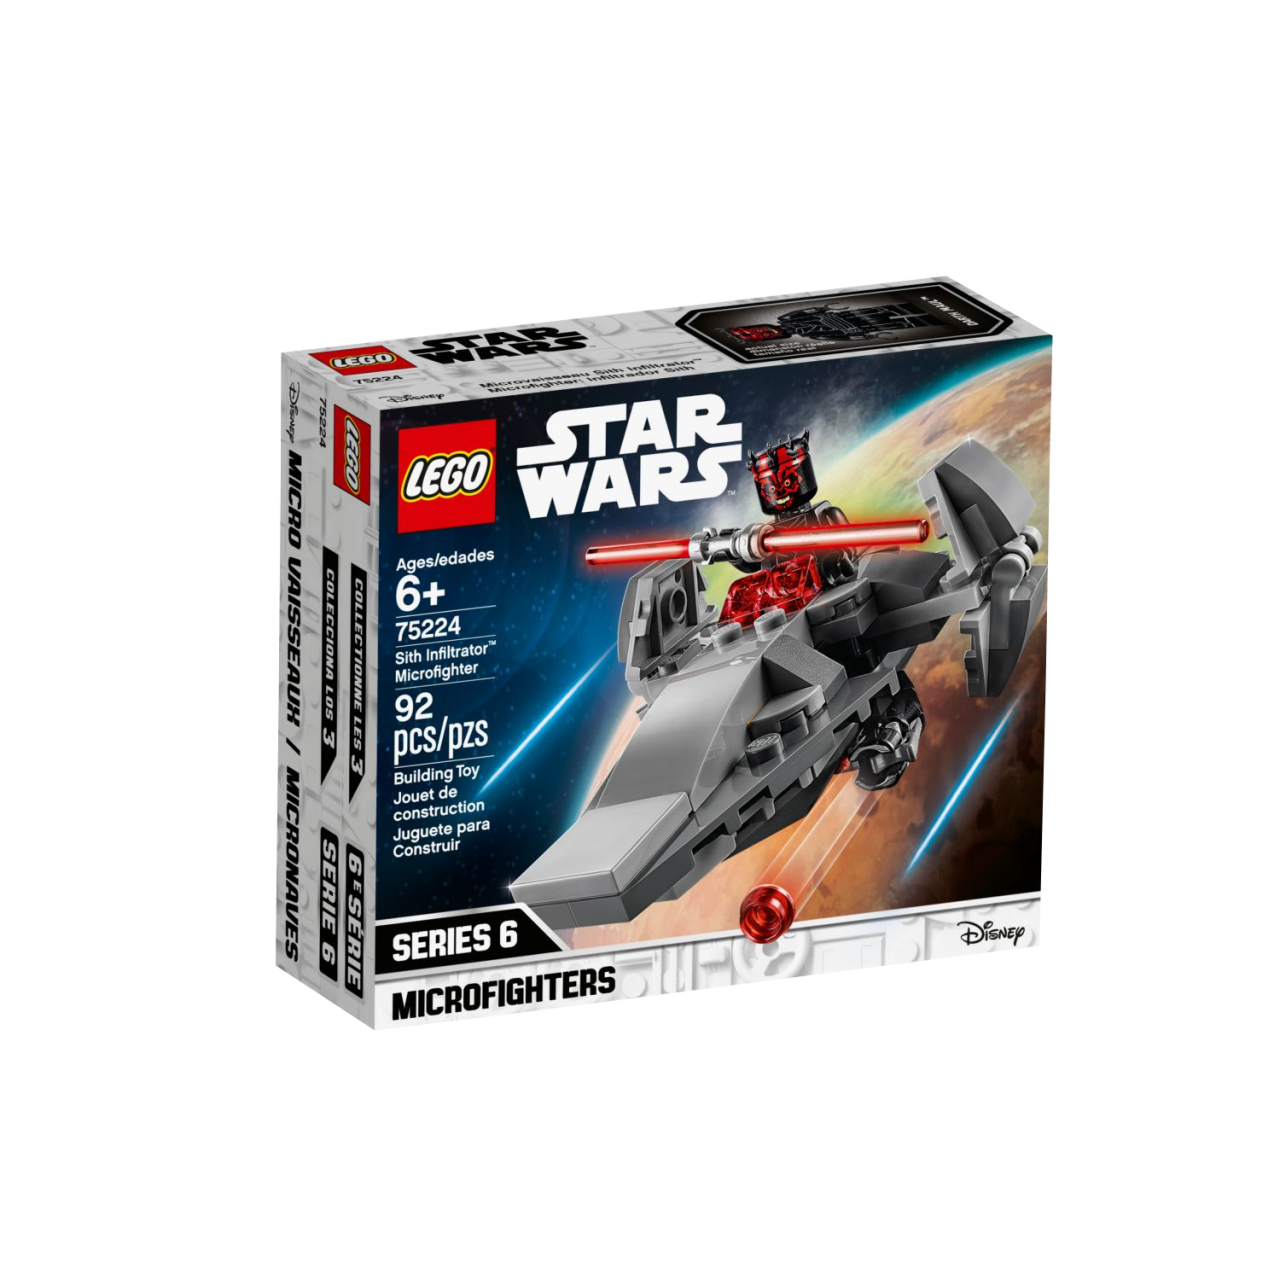 LEGO STAR WARS 75224 Sith Infiltrator Microfighter